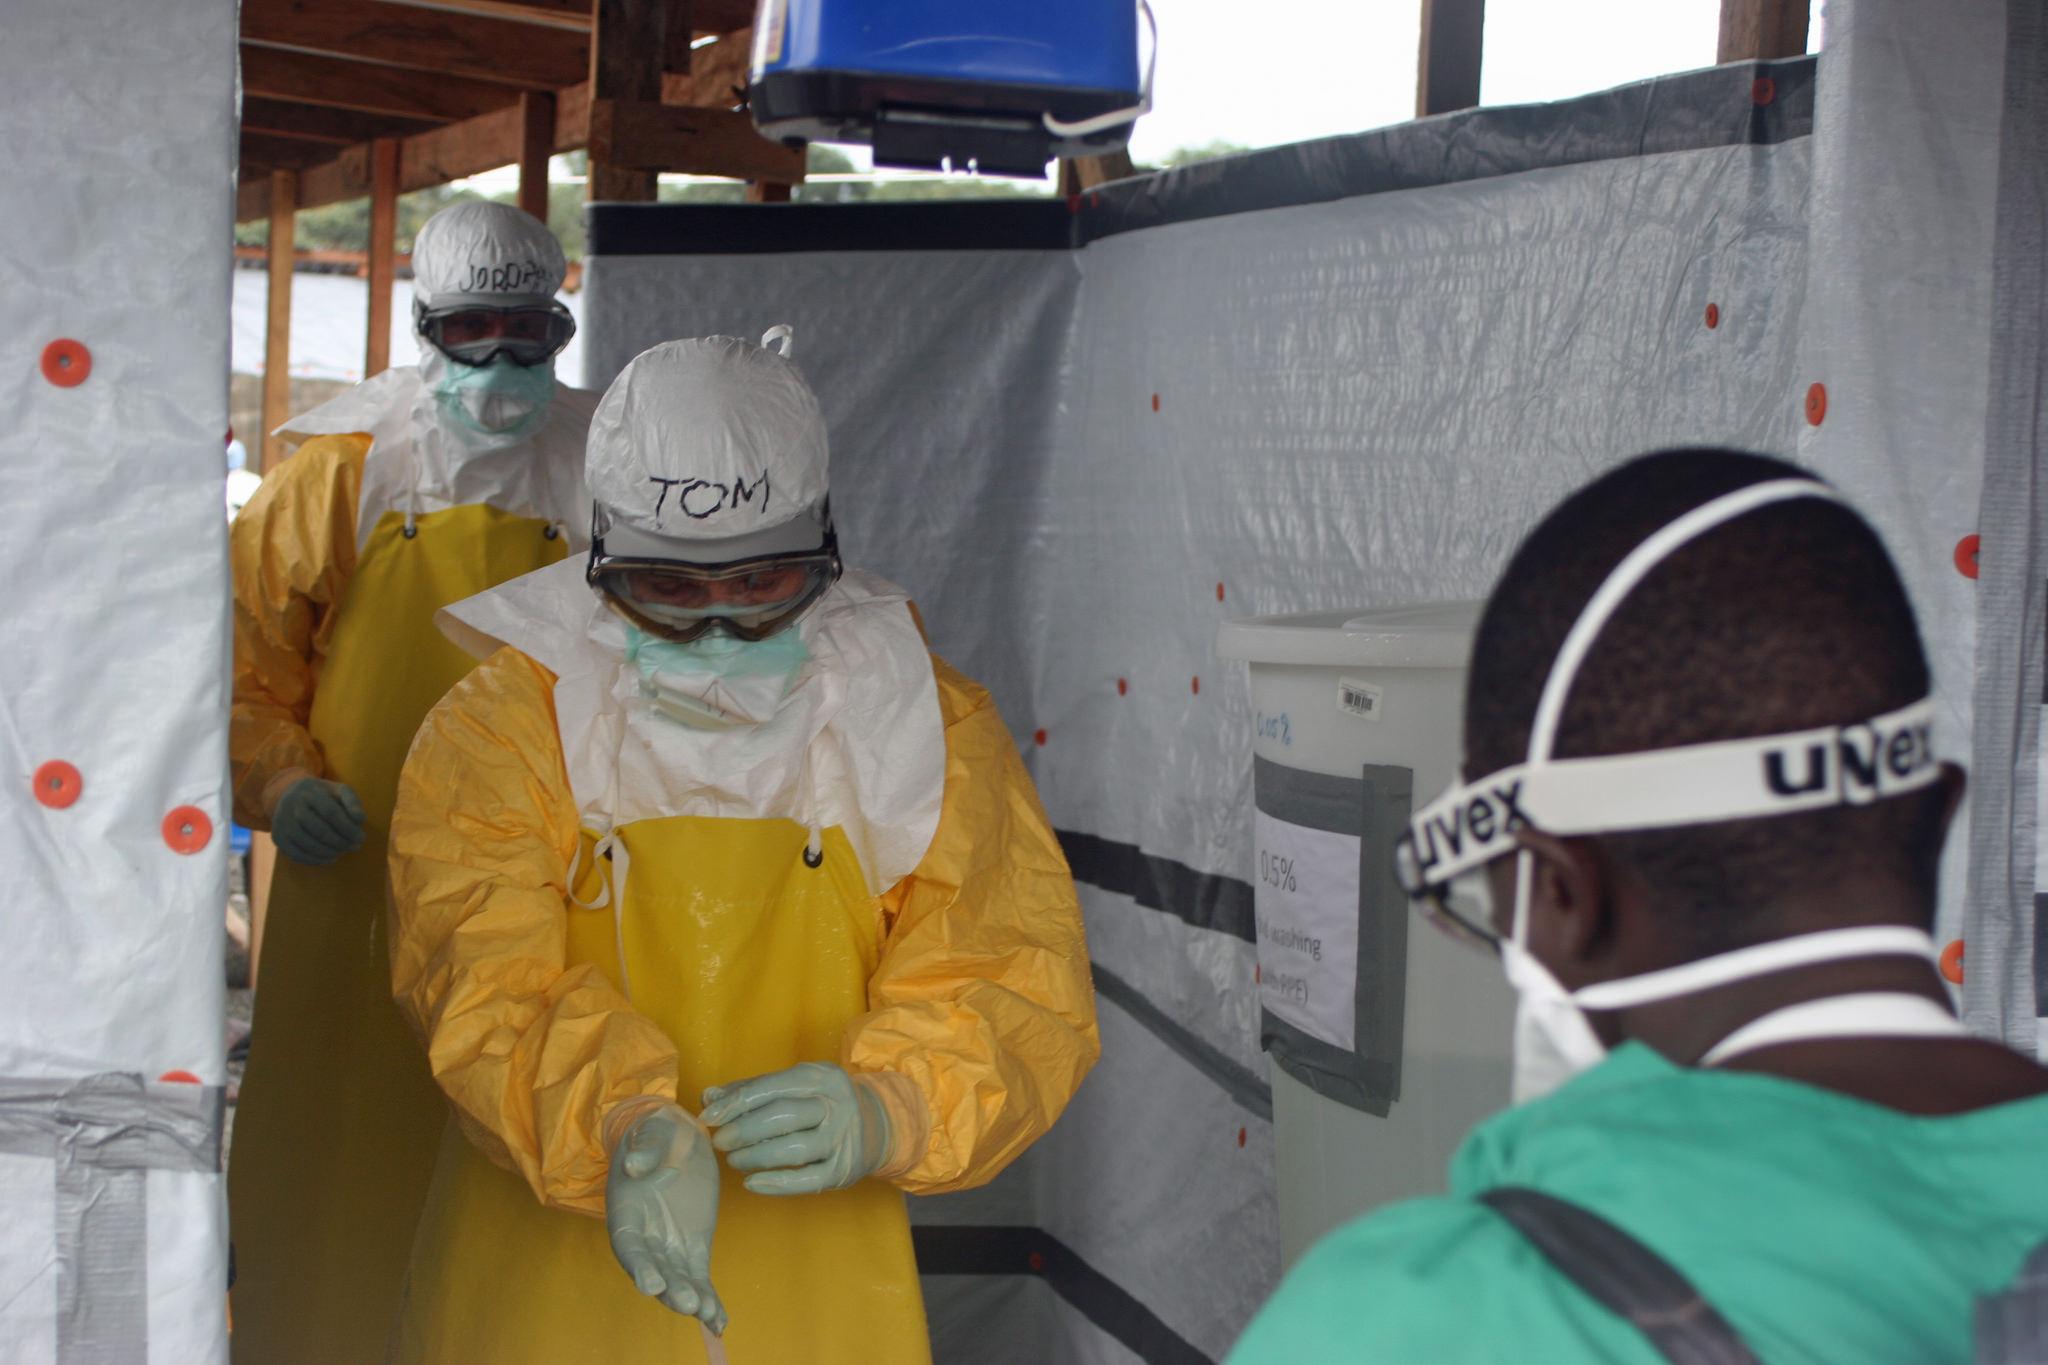 U.S. Centers for Disease Control and Prevention Director Tom Frieden, exiting an Ebola treatment unit.
flickr.com/cdcglobal